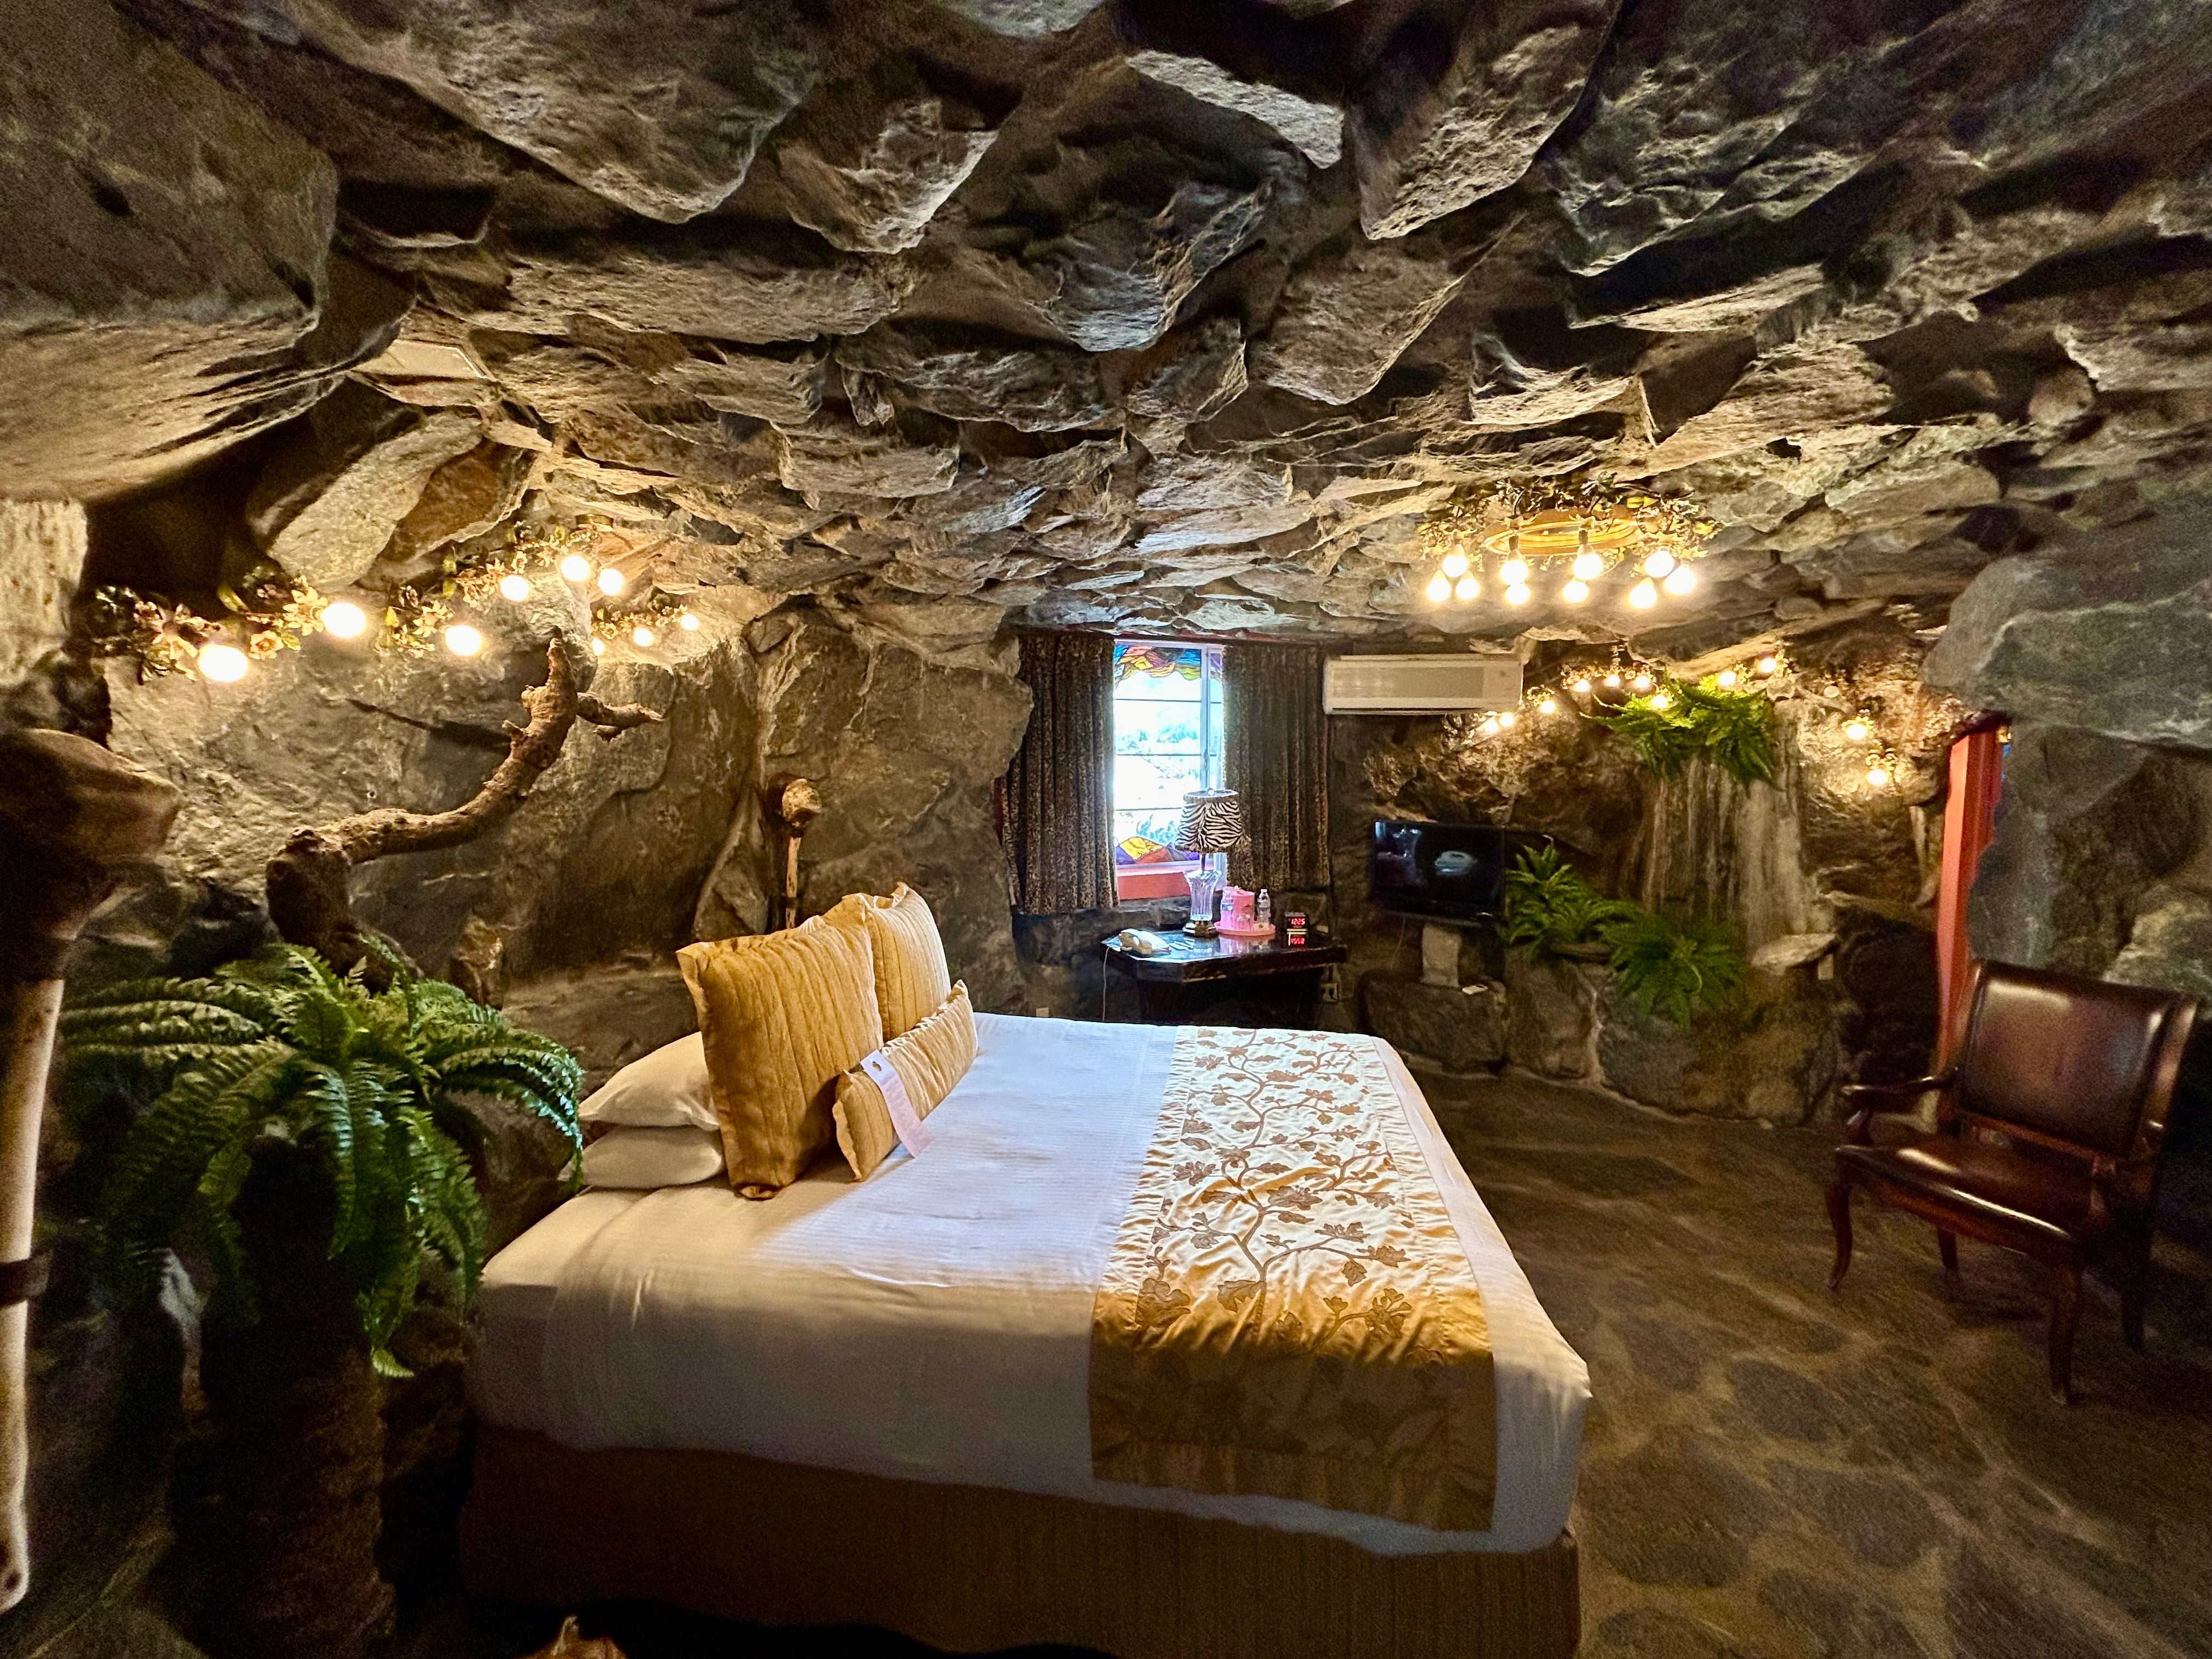 For a Flintstones-style room try the Madonna motel